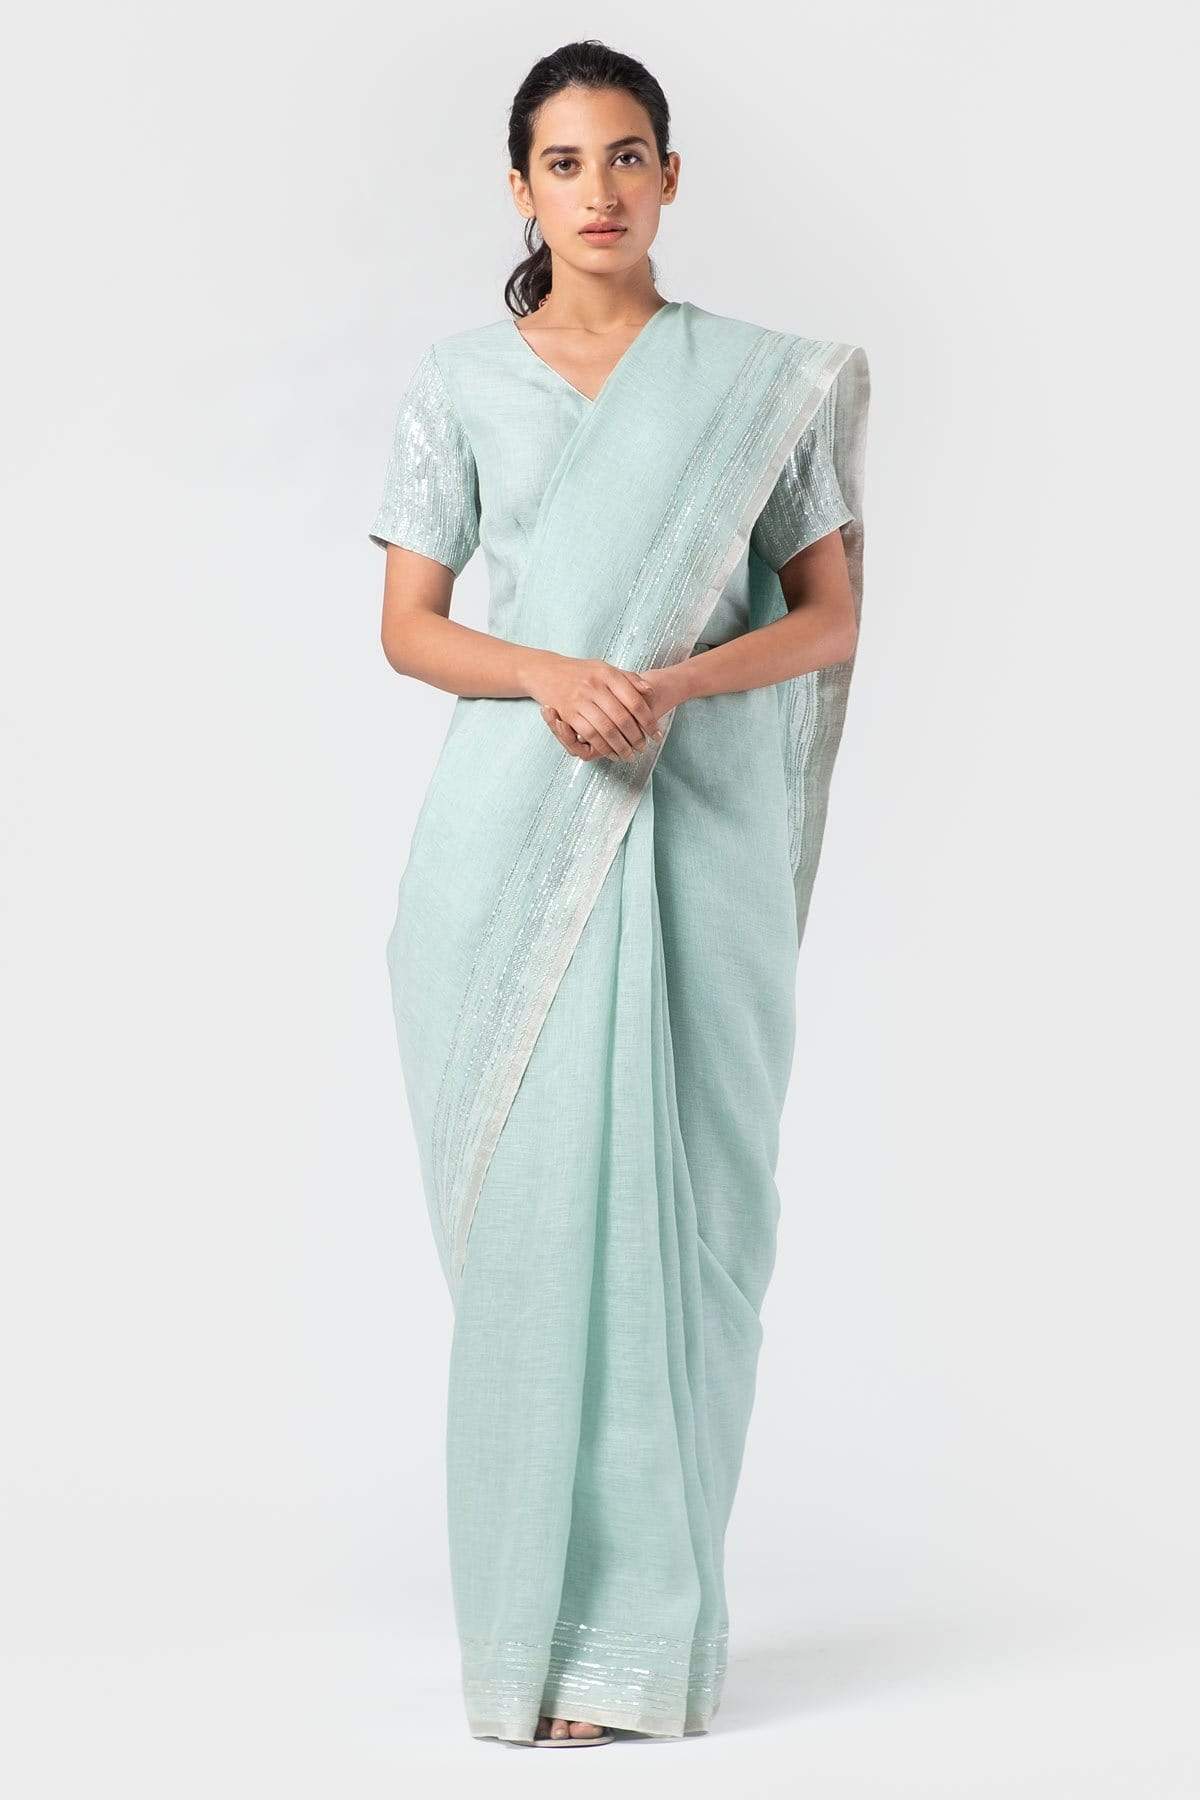 Powder Blue Linen Saree Indian Clothing in Denver, CO, Aurora, CO, Boulder, CO, Fort Collins, CO, Colorado Springs, CO, Parker, CO, Highlands Ranch, CO, Cherry Creek, CO, Centennial, CO, and Longmont, CO. NATIONWIDE SHIPPING USA- India Fashion X